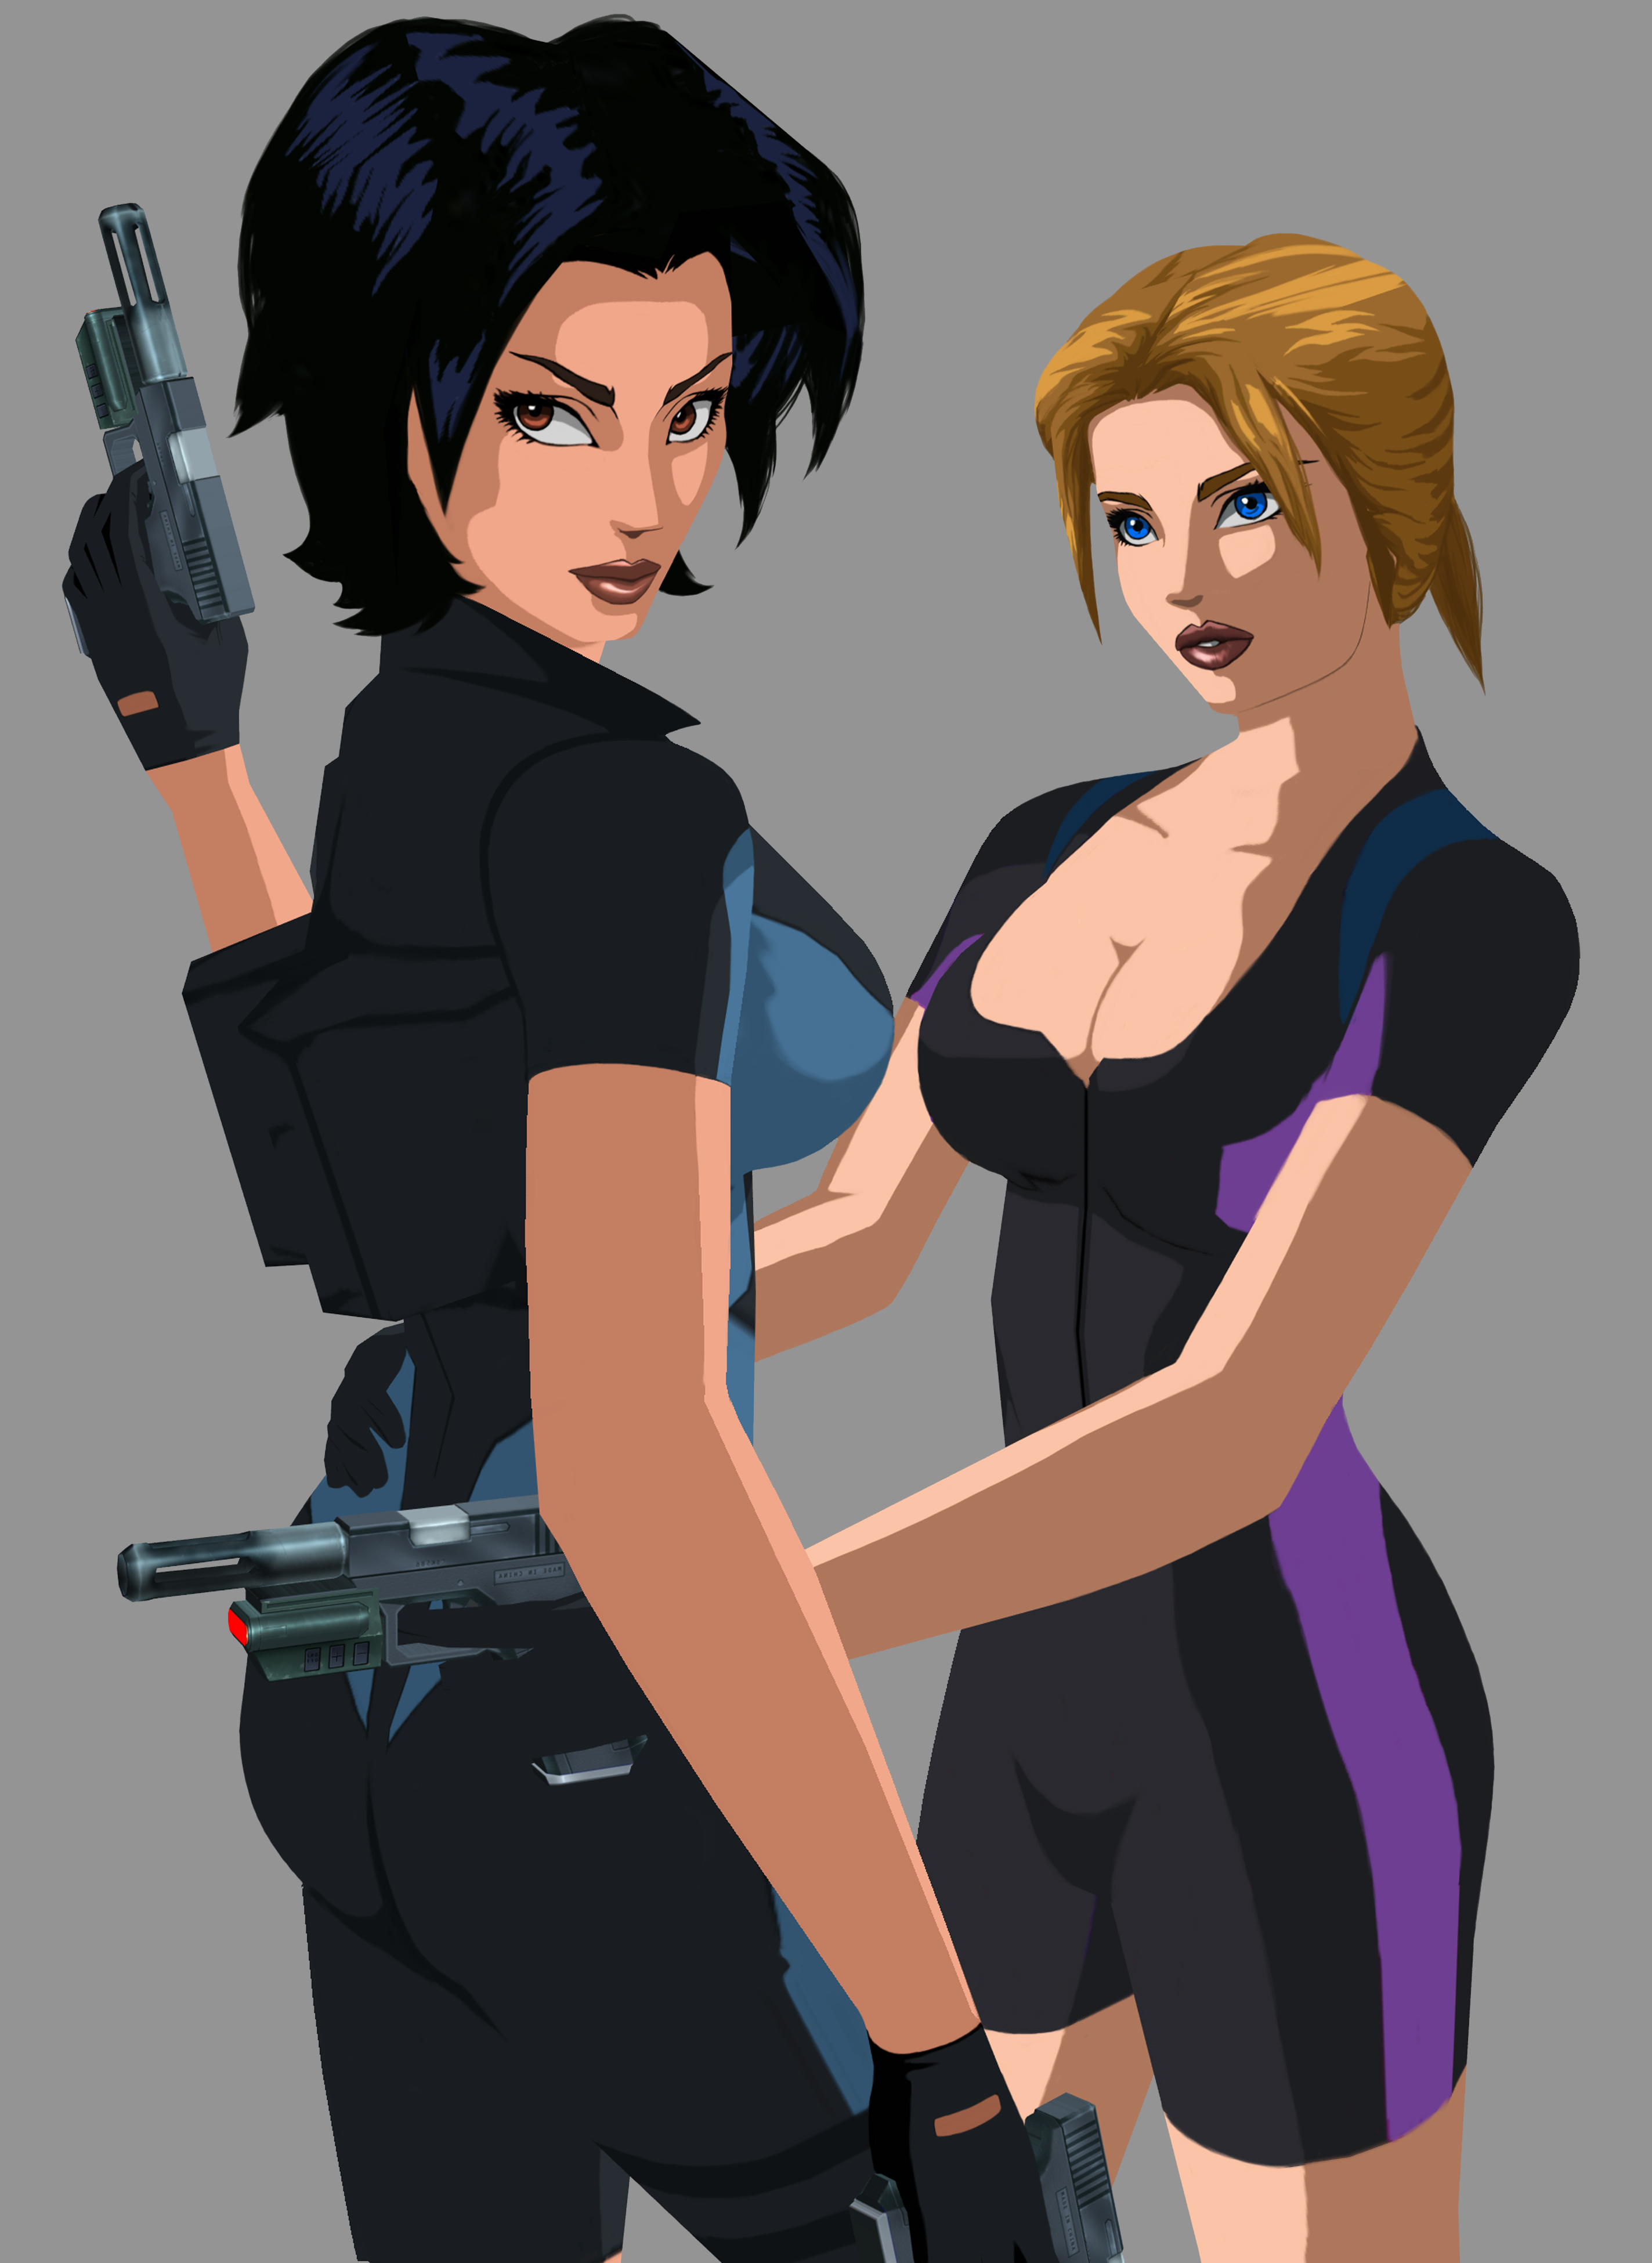 There are far more images available for Fear Effect 2: Retro Helix